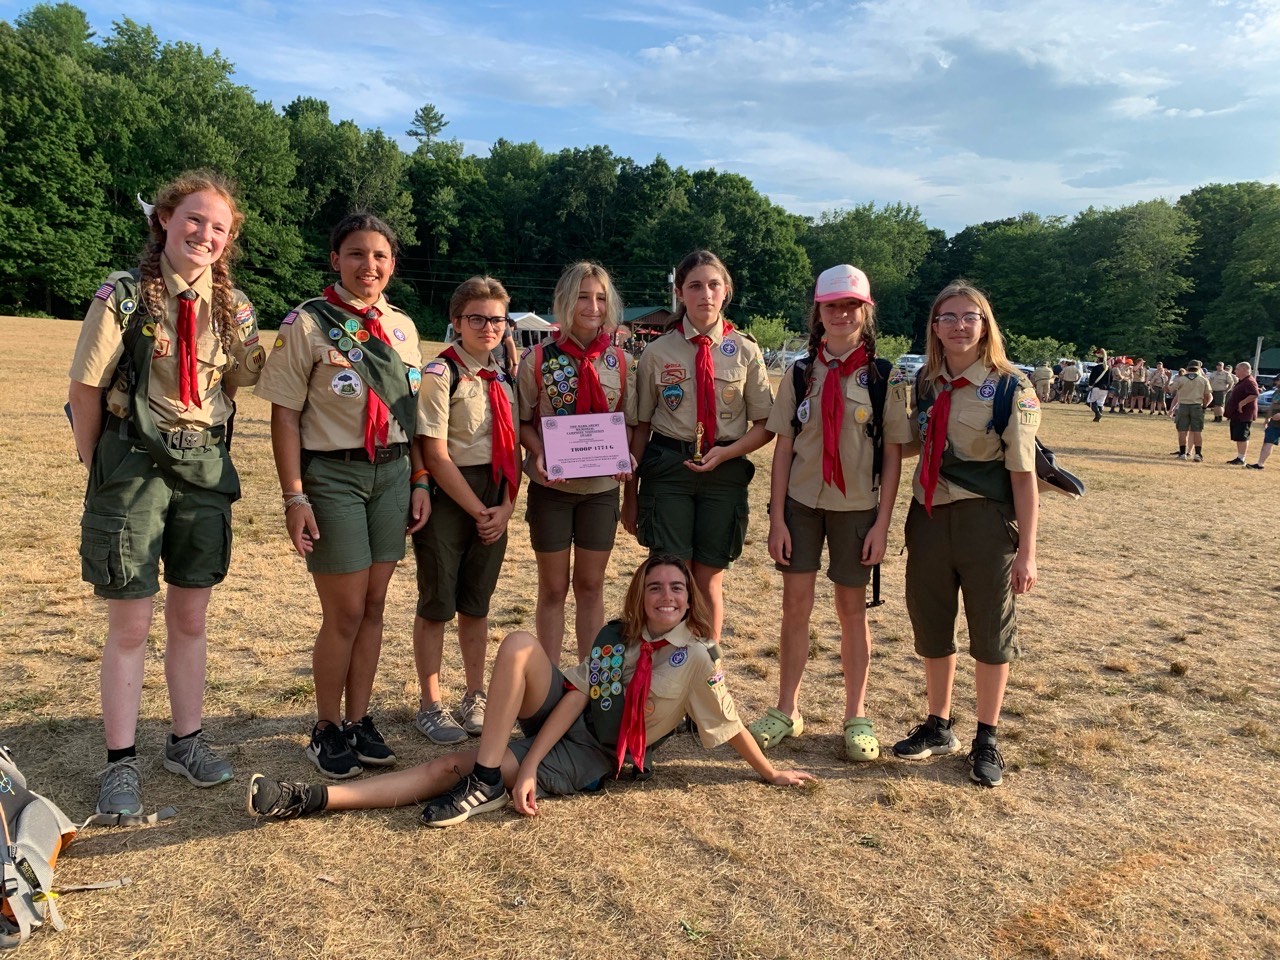 Girls joining the Boys Scouts: How and Why Things Have Changed – The Cub